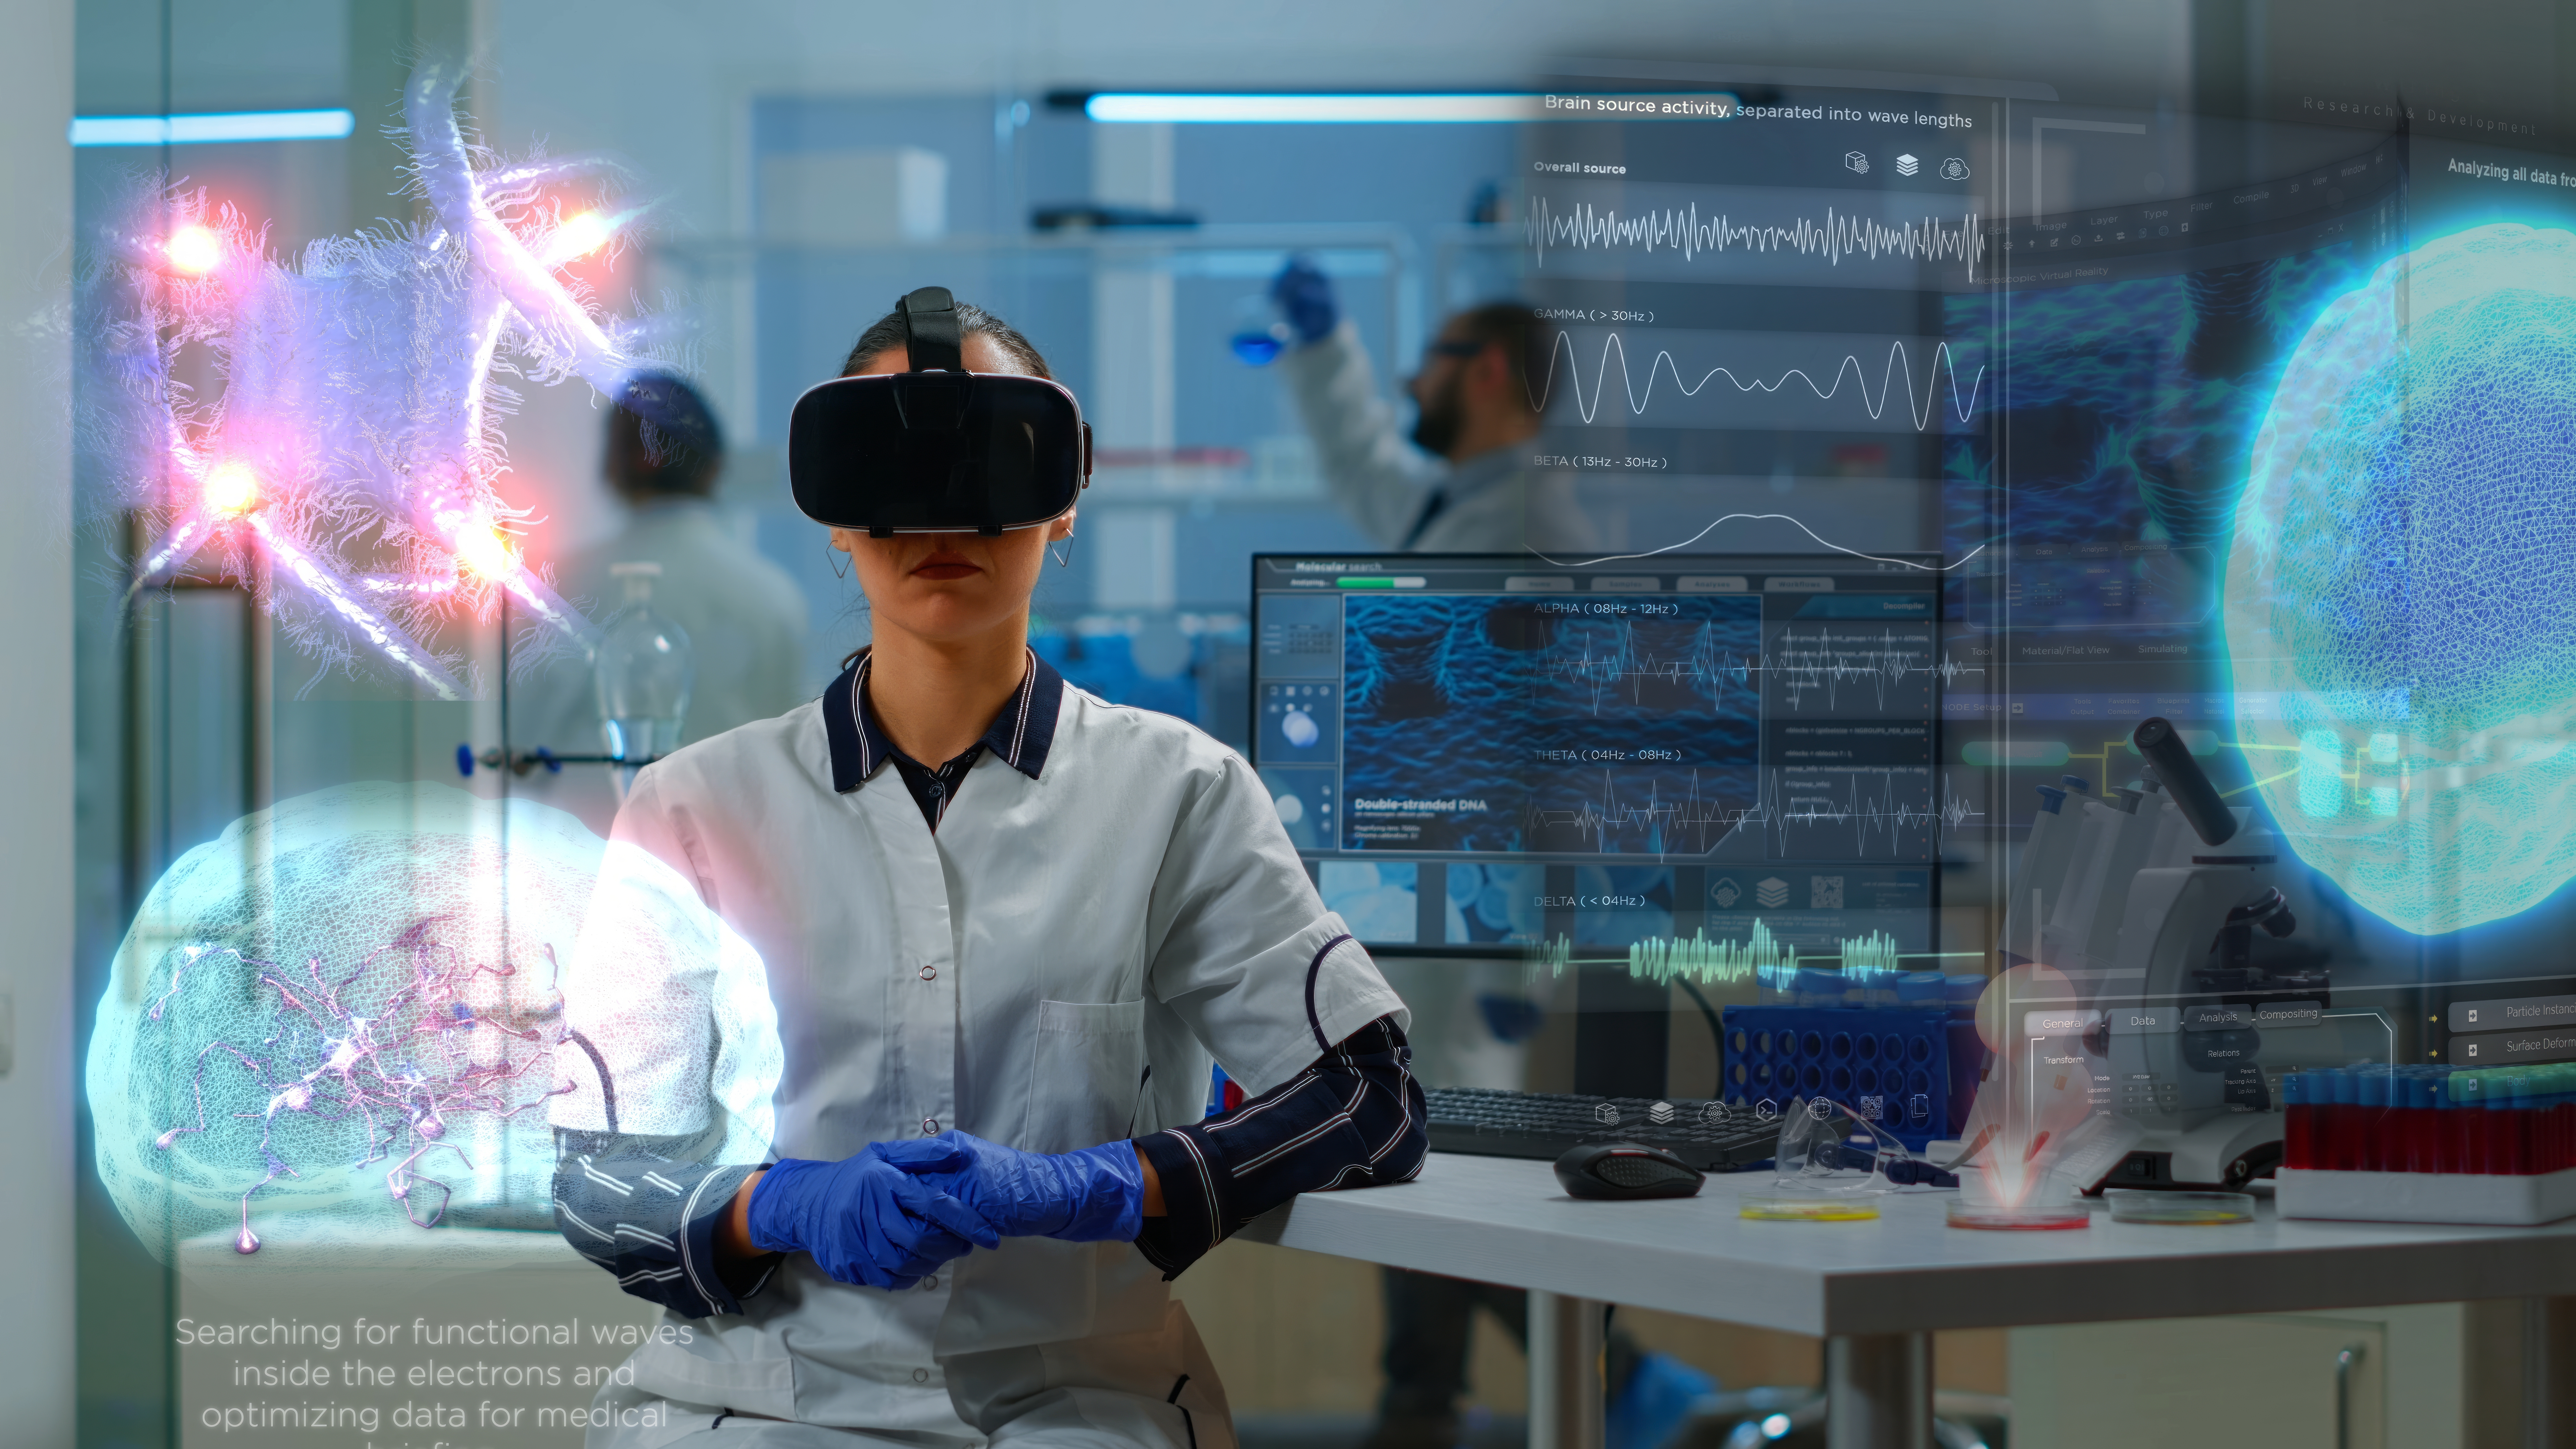 scientific-specialist-research-lab-wearing-vr-goggles-using-high-tech-equipment-wired-sensors-medical-study-healthcare-practitioner-using-virtual-reality-technology-visualize-datasets (1).jpg